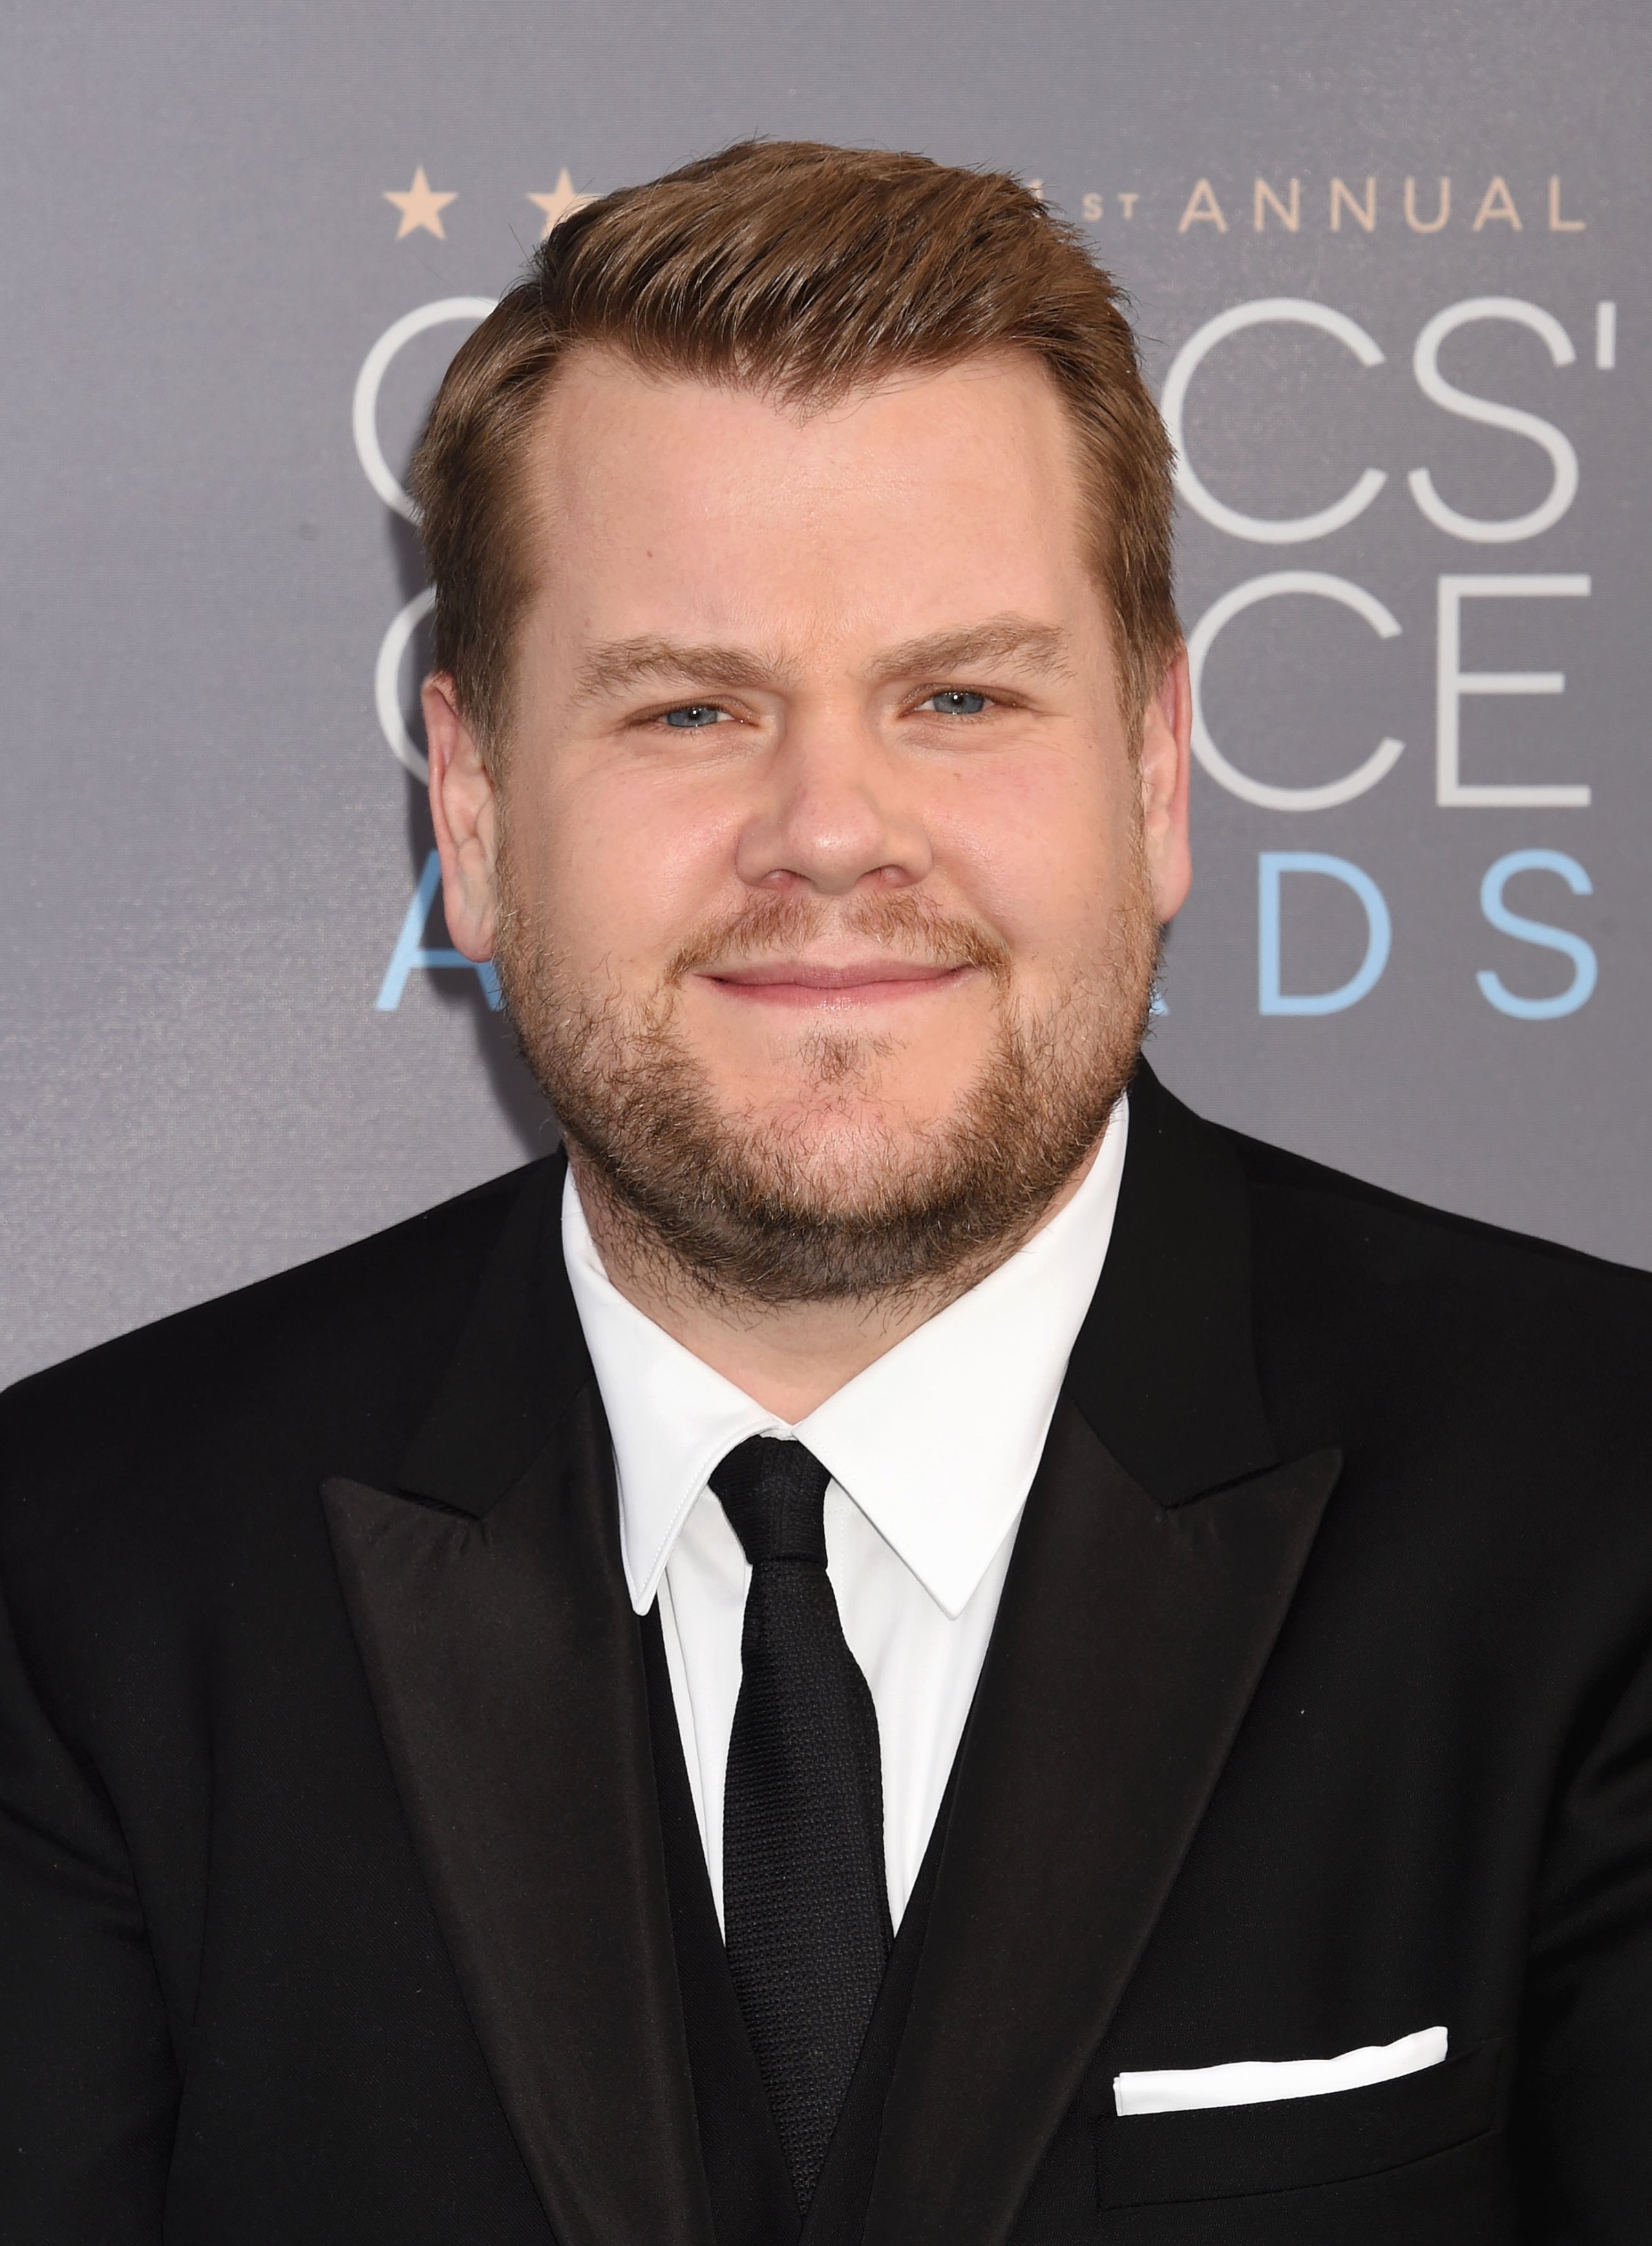 Actor/TV persoanlity James Corden attends the 21st Annual Critics' Choice Awards at Barker Hangar on January 17, 2016 in Santa Monica, California.